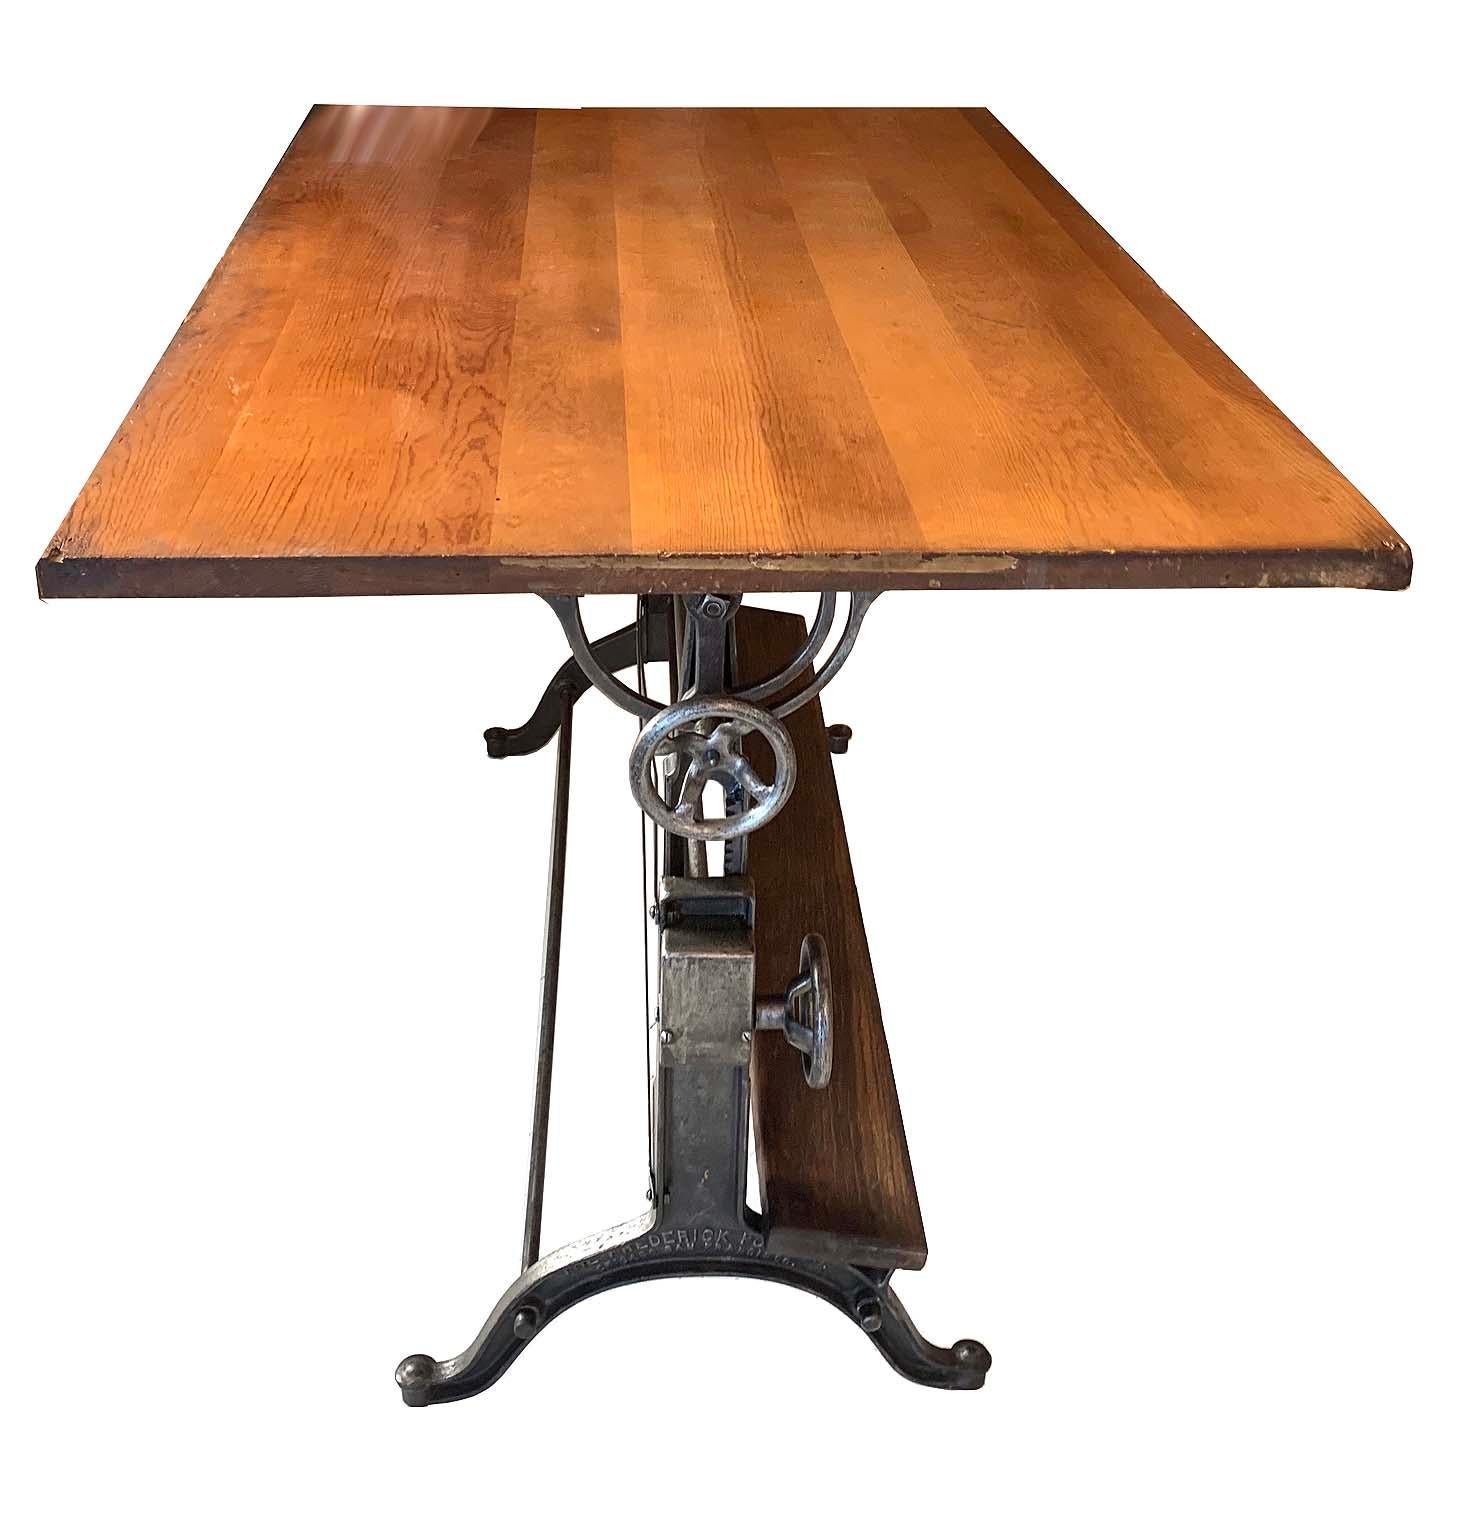 Iron Antique Drafting Table /Desk Frederick Post Co.